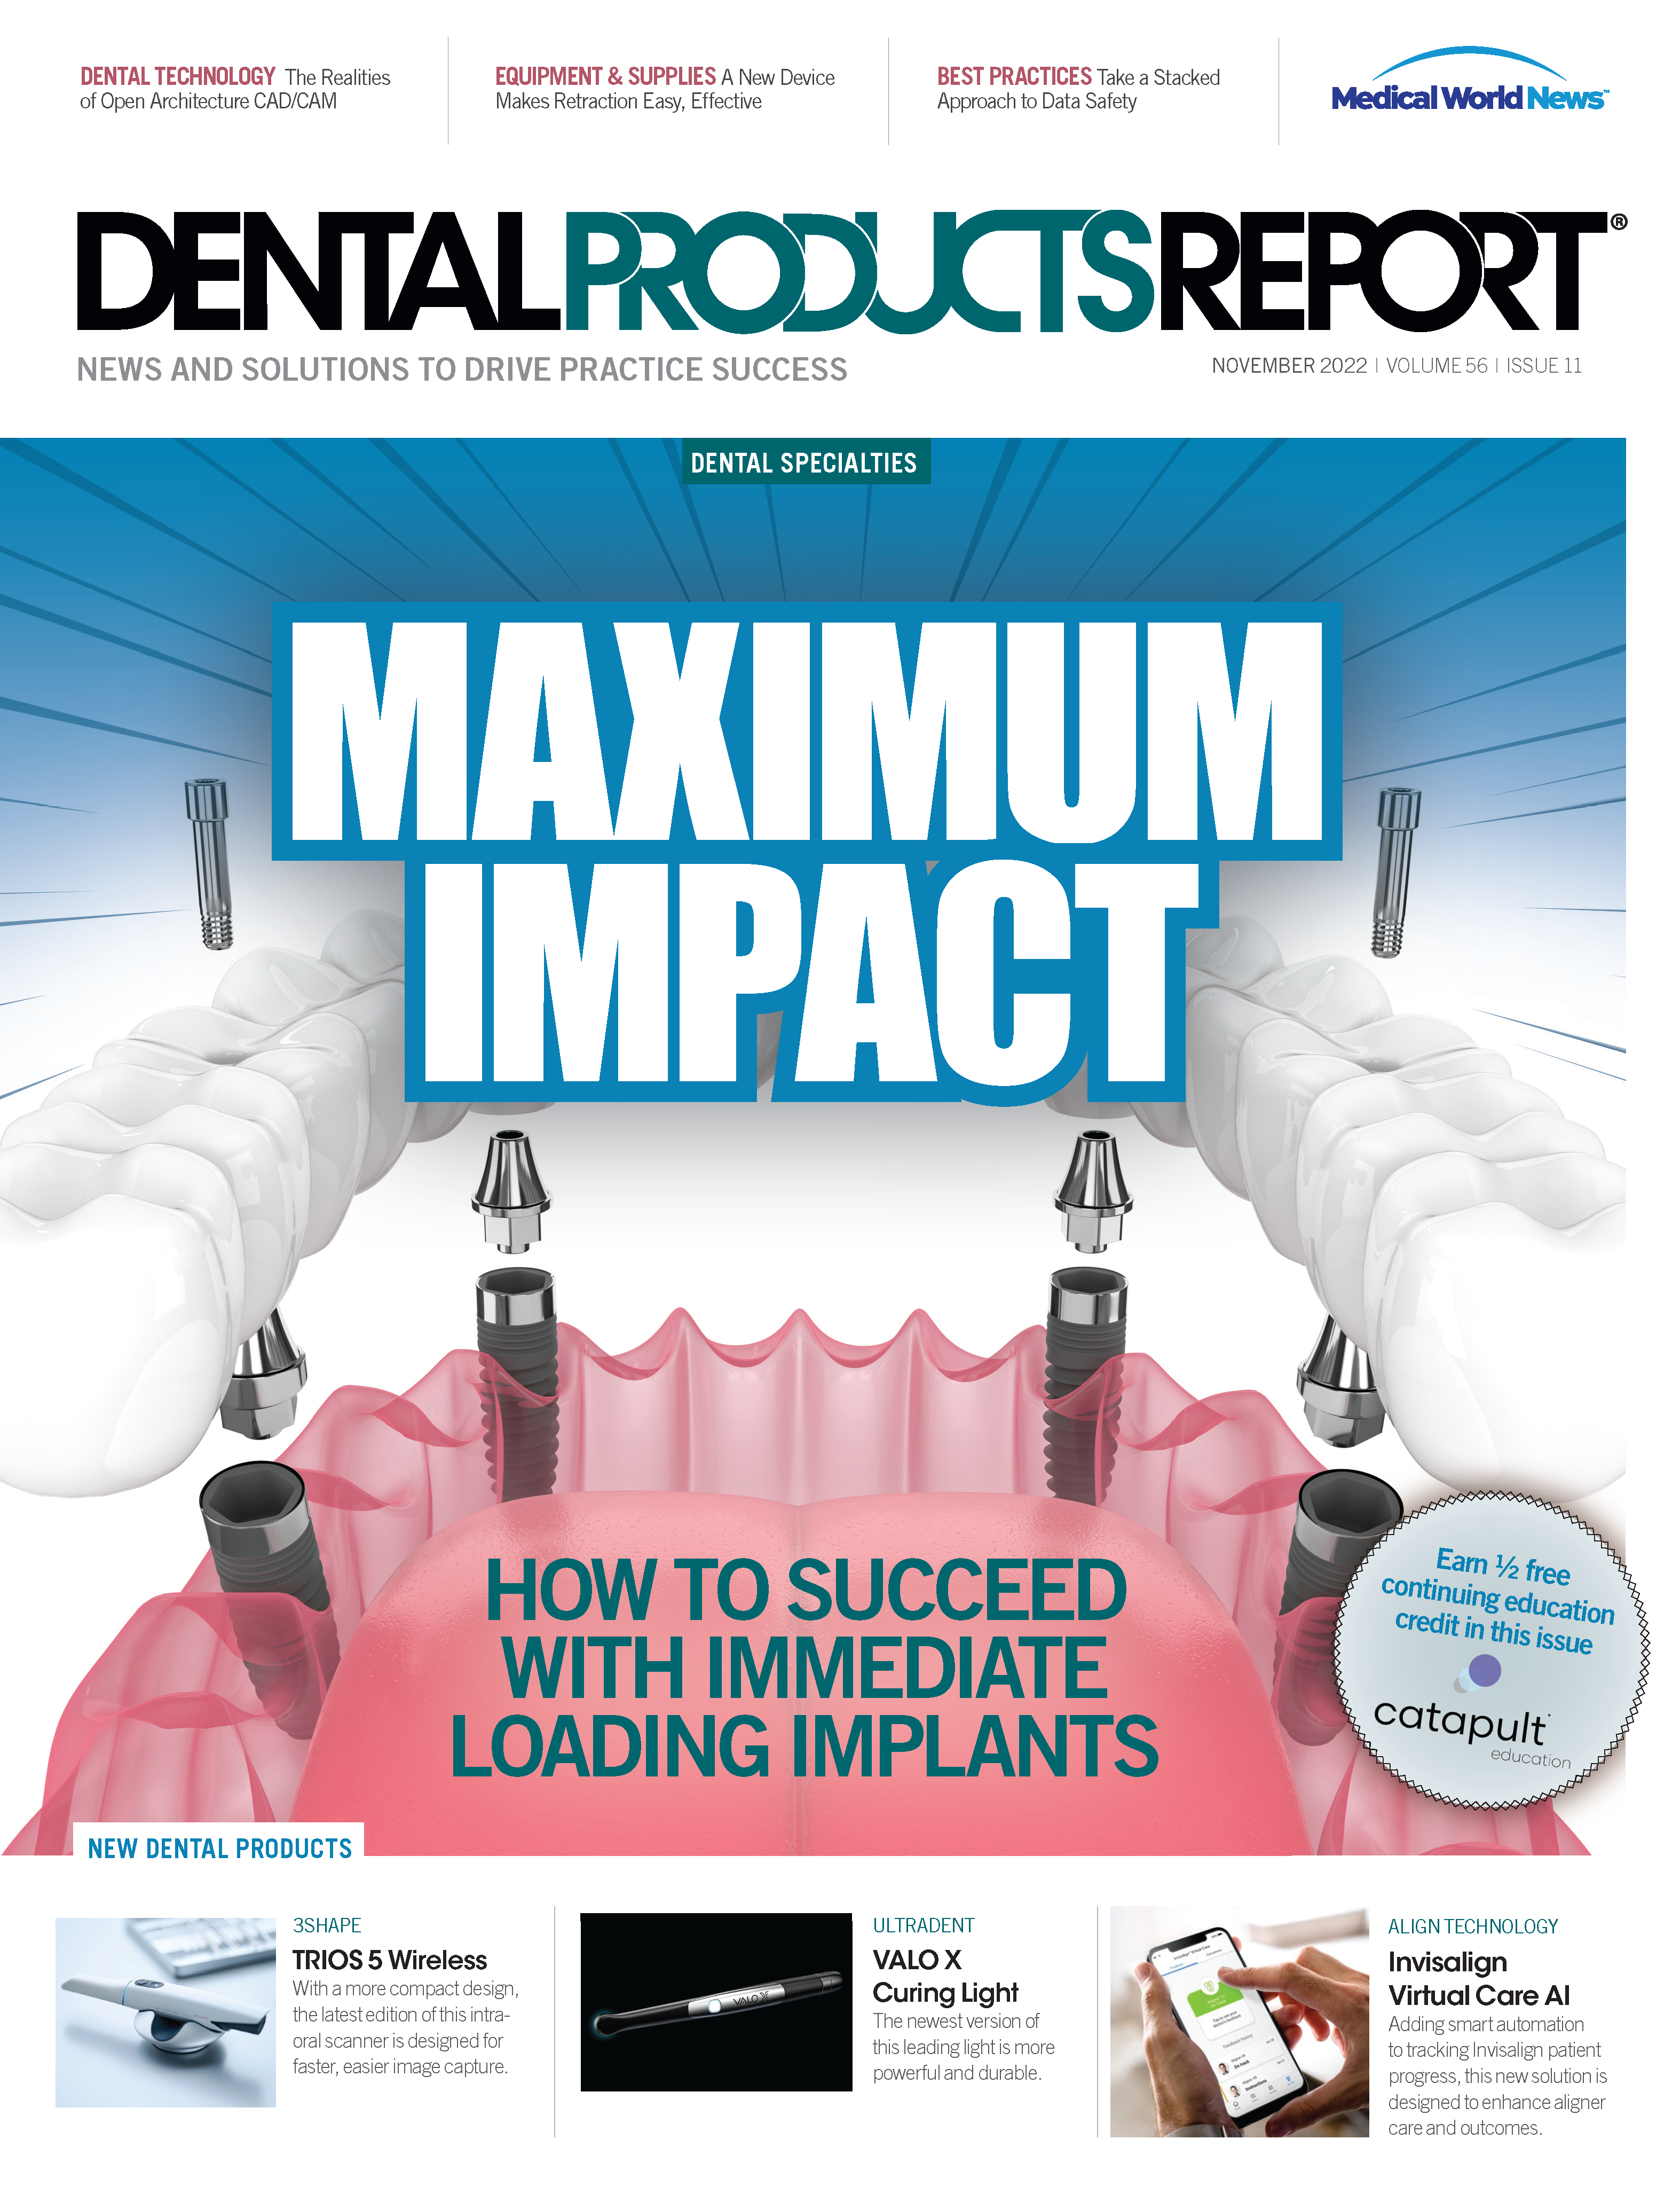 Dental Products Report November 2022 issue cover - Maximum Impact